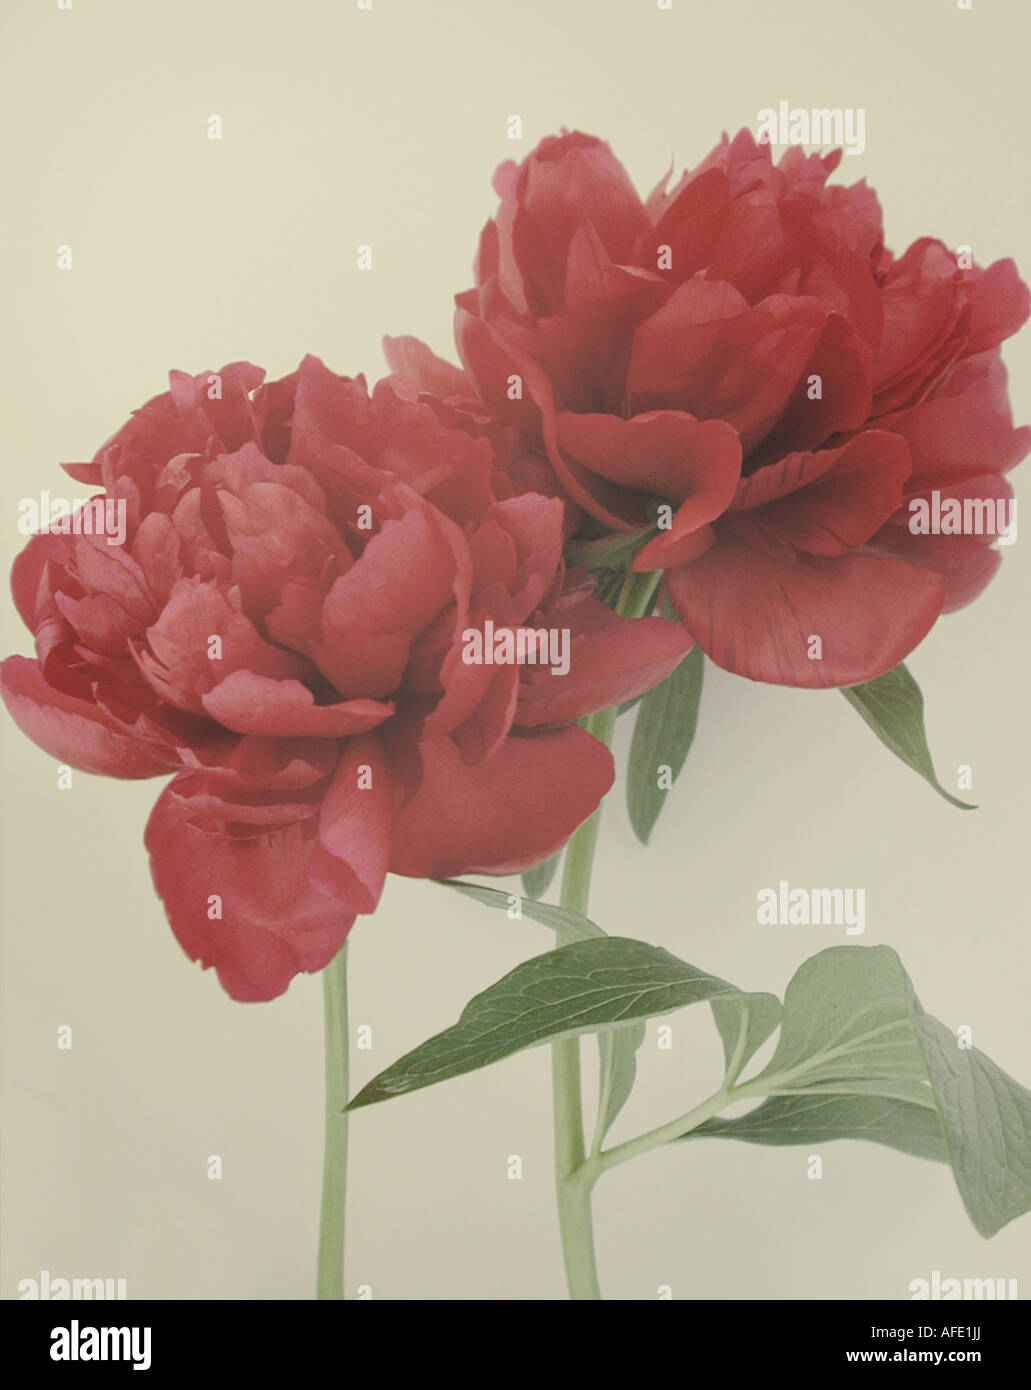 Two red Peonies shot to create an illustrative feel. Stock Photo